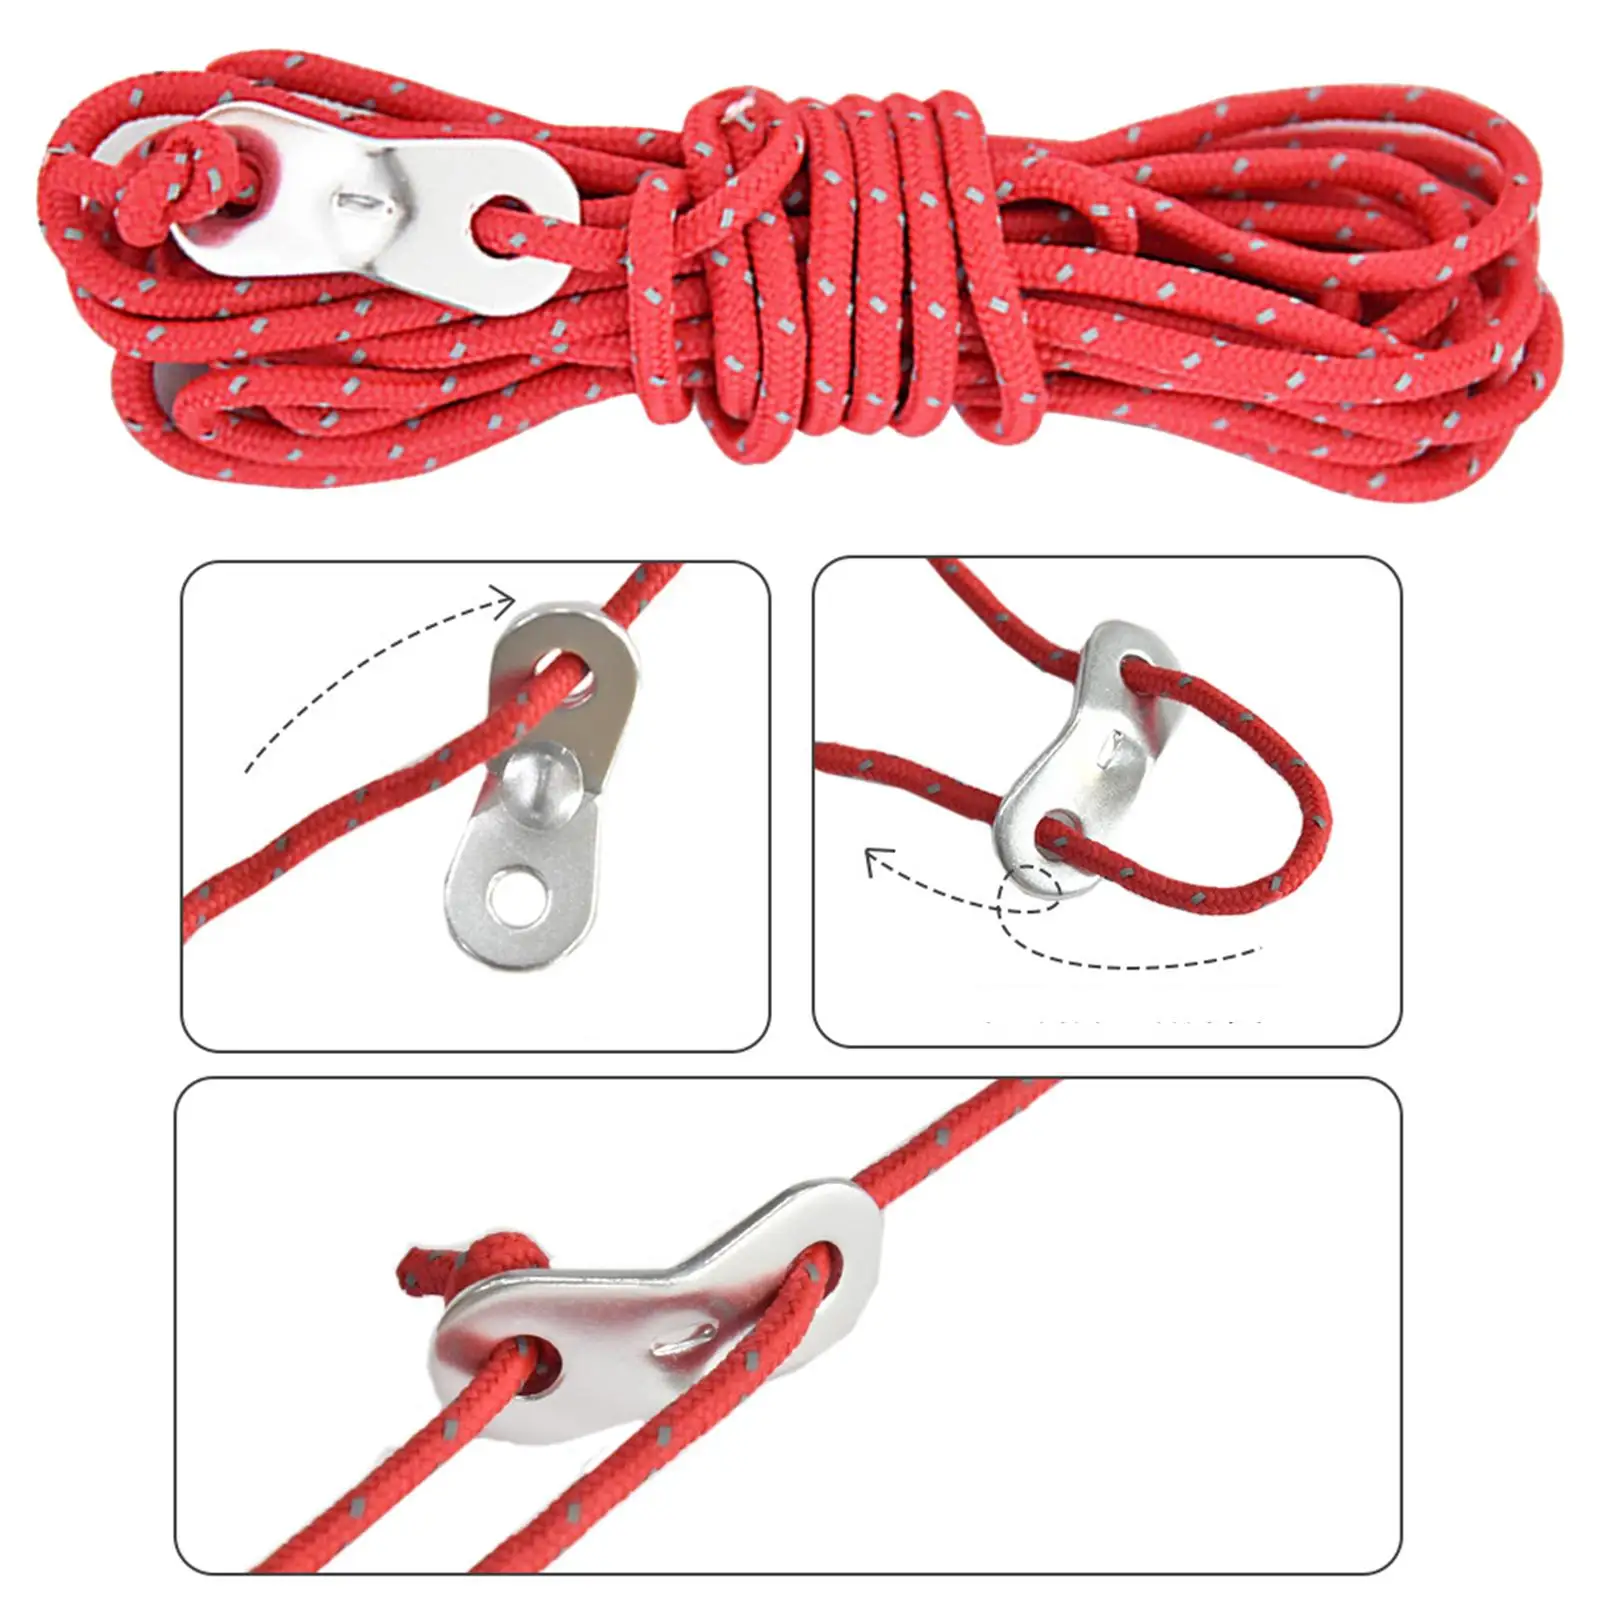 2x Windproof Wind Rope with Adjustment Buckle Accs Loose Proof for Camping Tent Survival